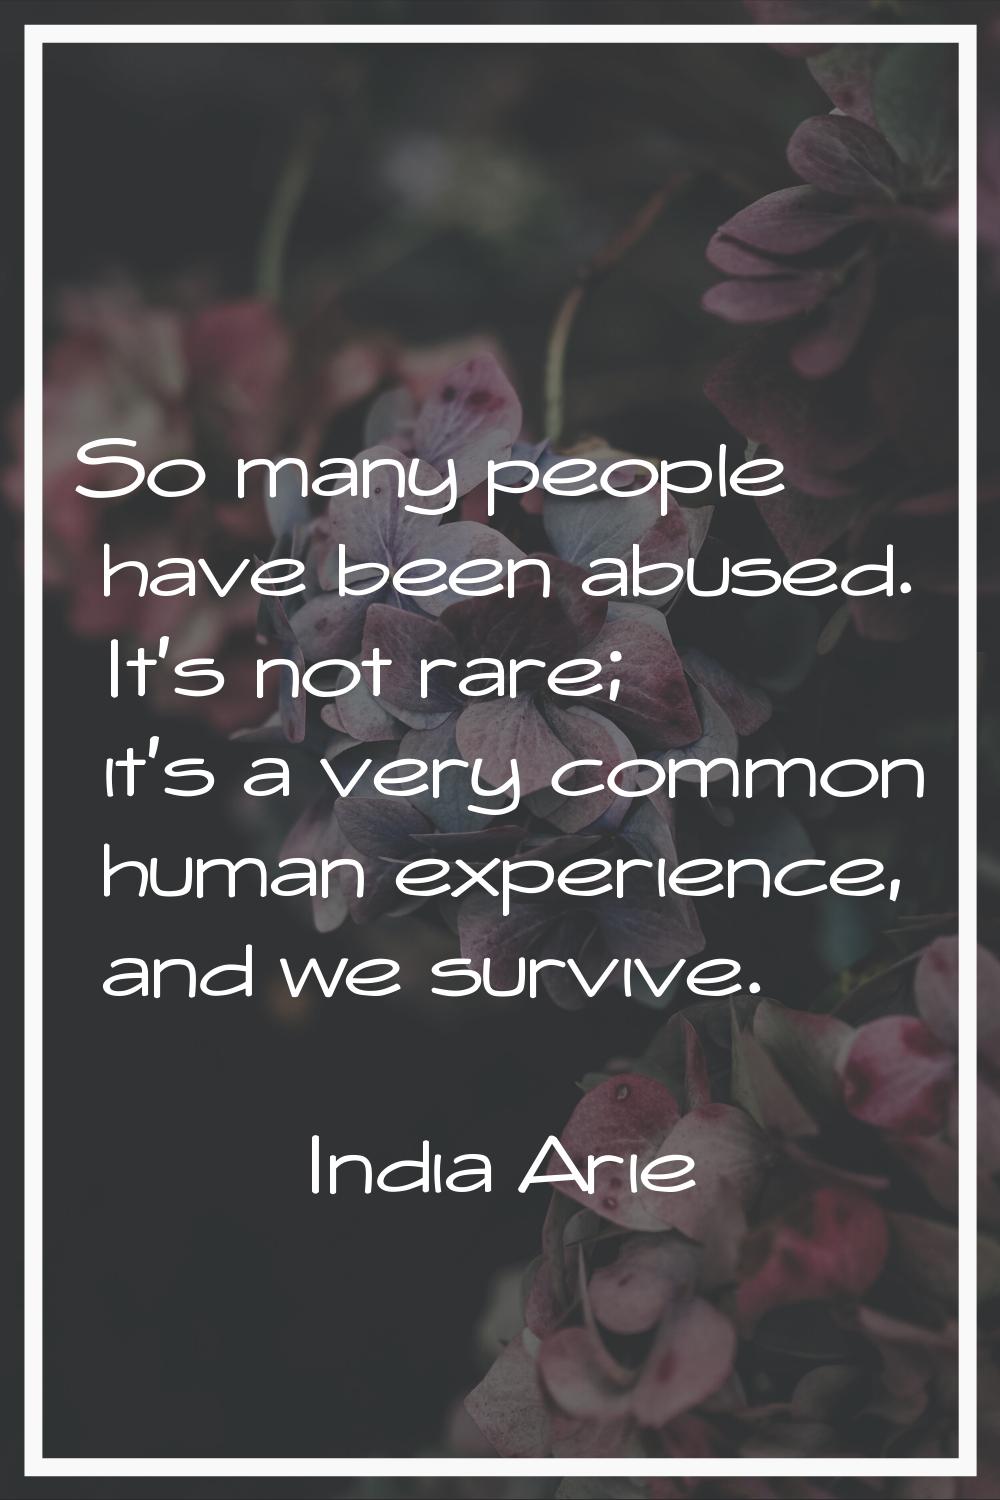 So many people have been abused. It's not rare; it's a very common human experience, and we survive